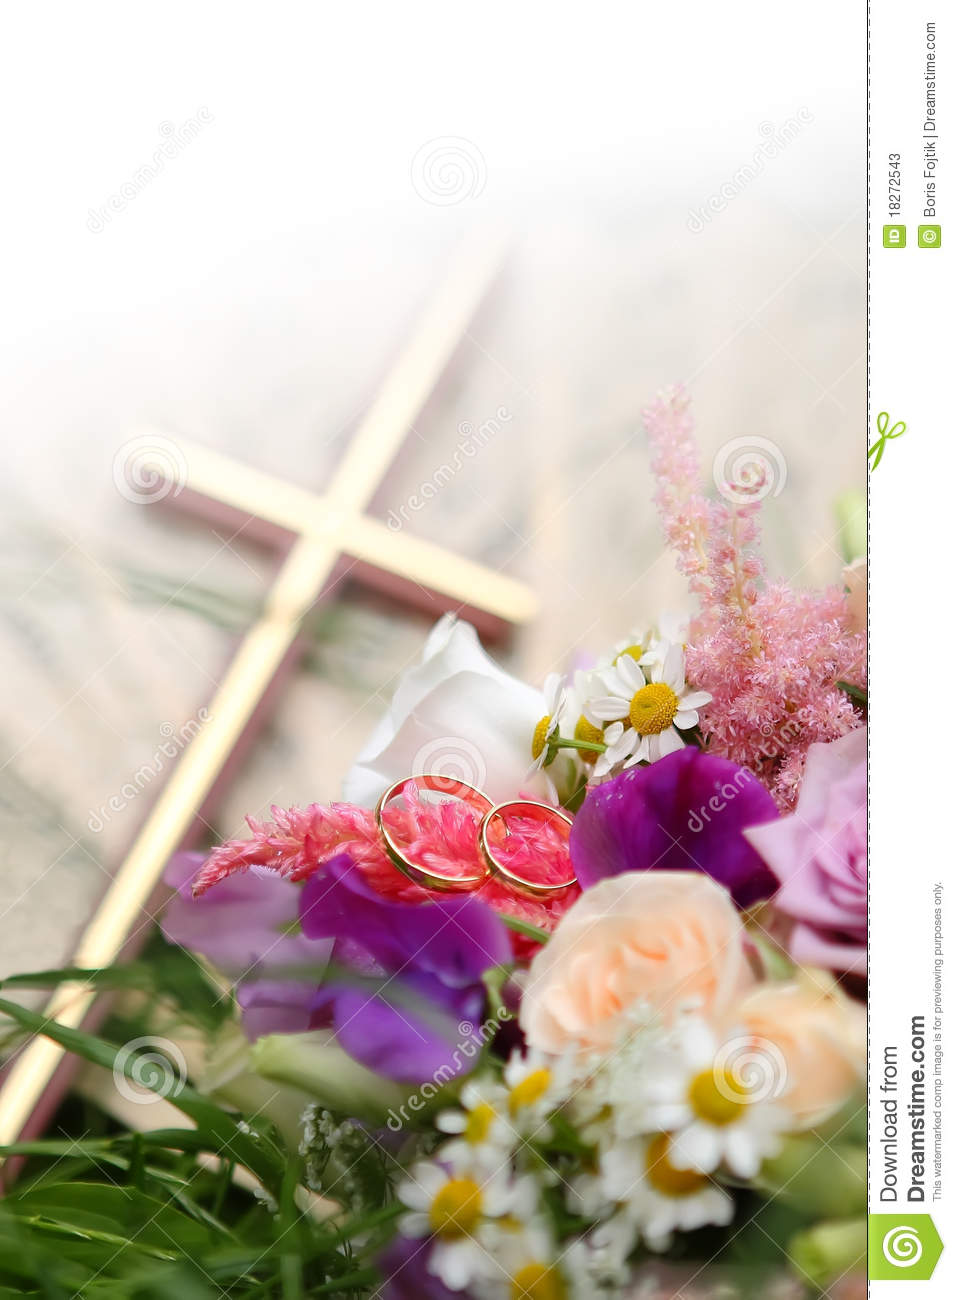 With Colorful Flowers And Cross In Background Mr No Pr No 3 1313 5